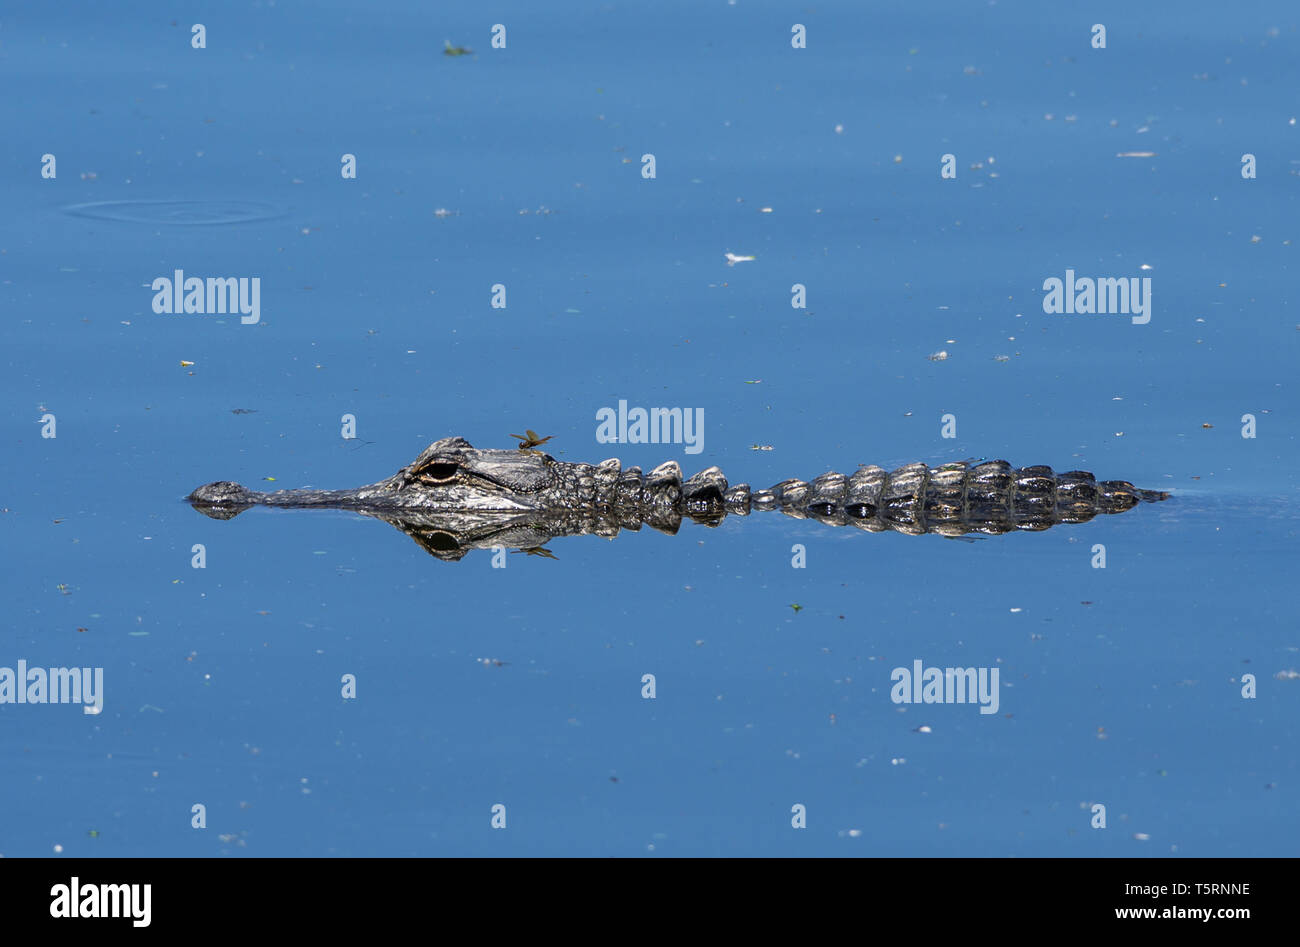 An American Alligator (Alligator mississippiensis) stays perfectly calm in a lake. Houston, Texas, USA. Stock Photo